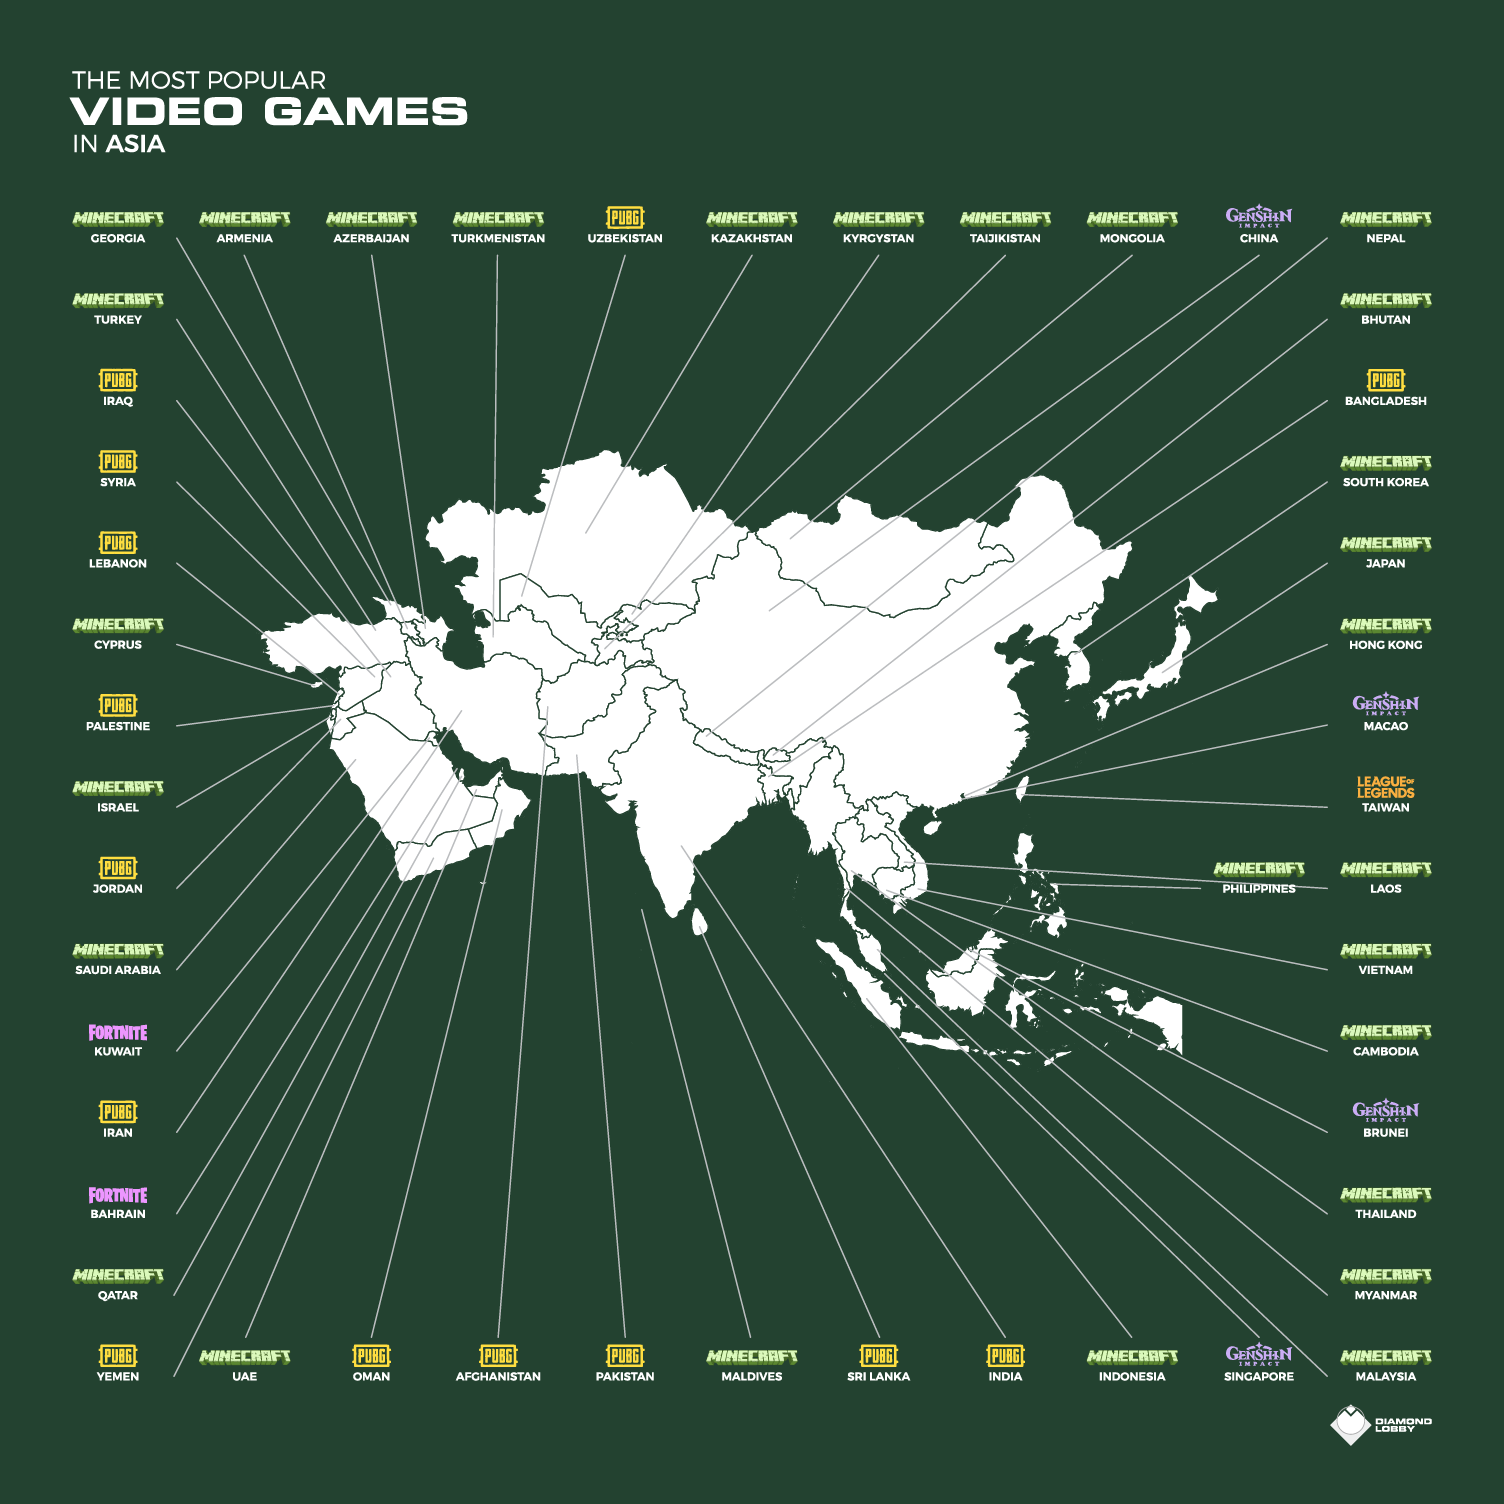 A map showing the most popular games in Asia with each country labeled.